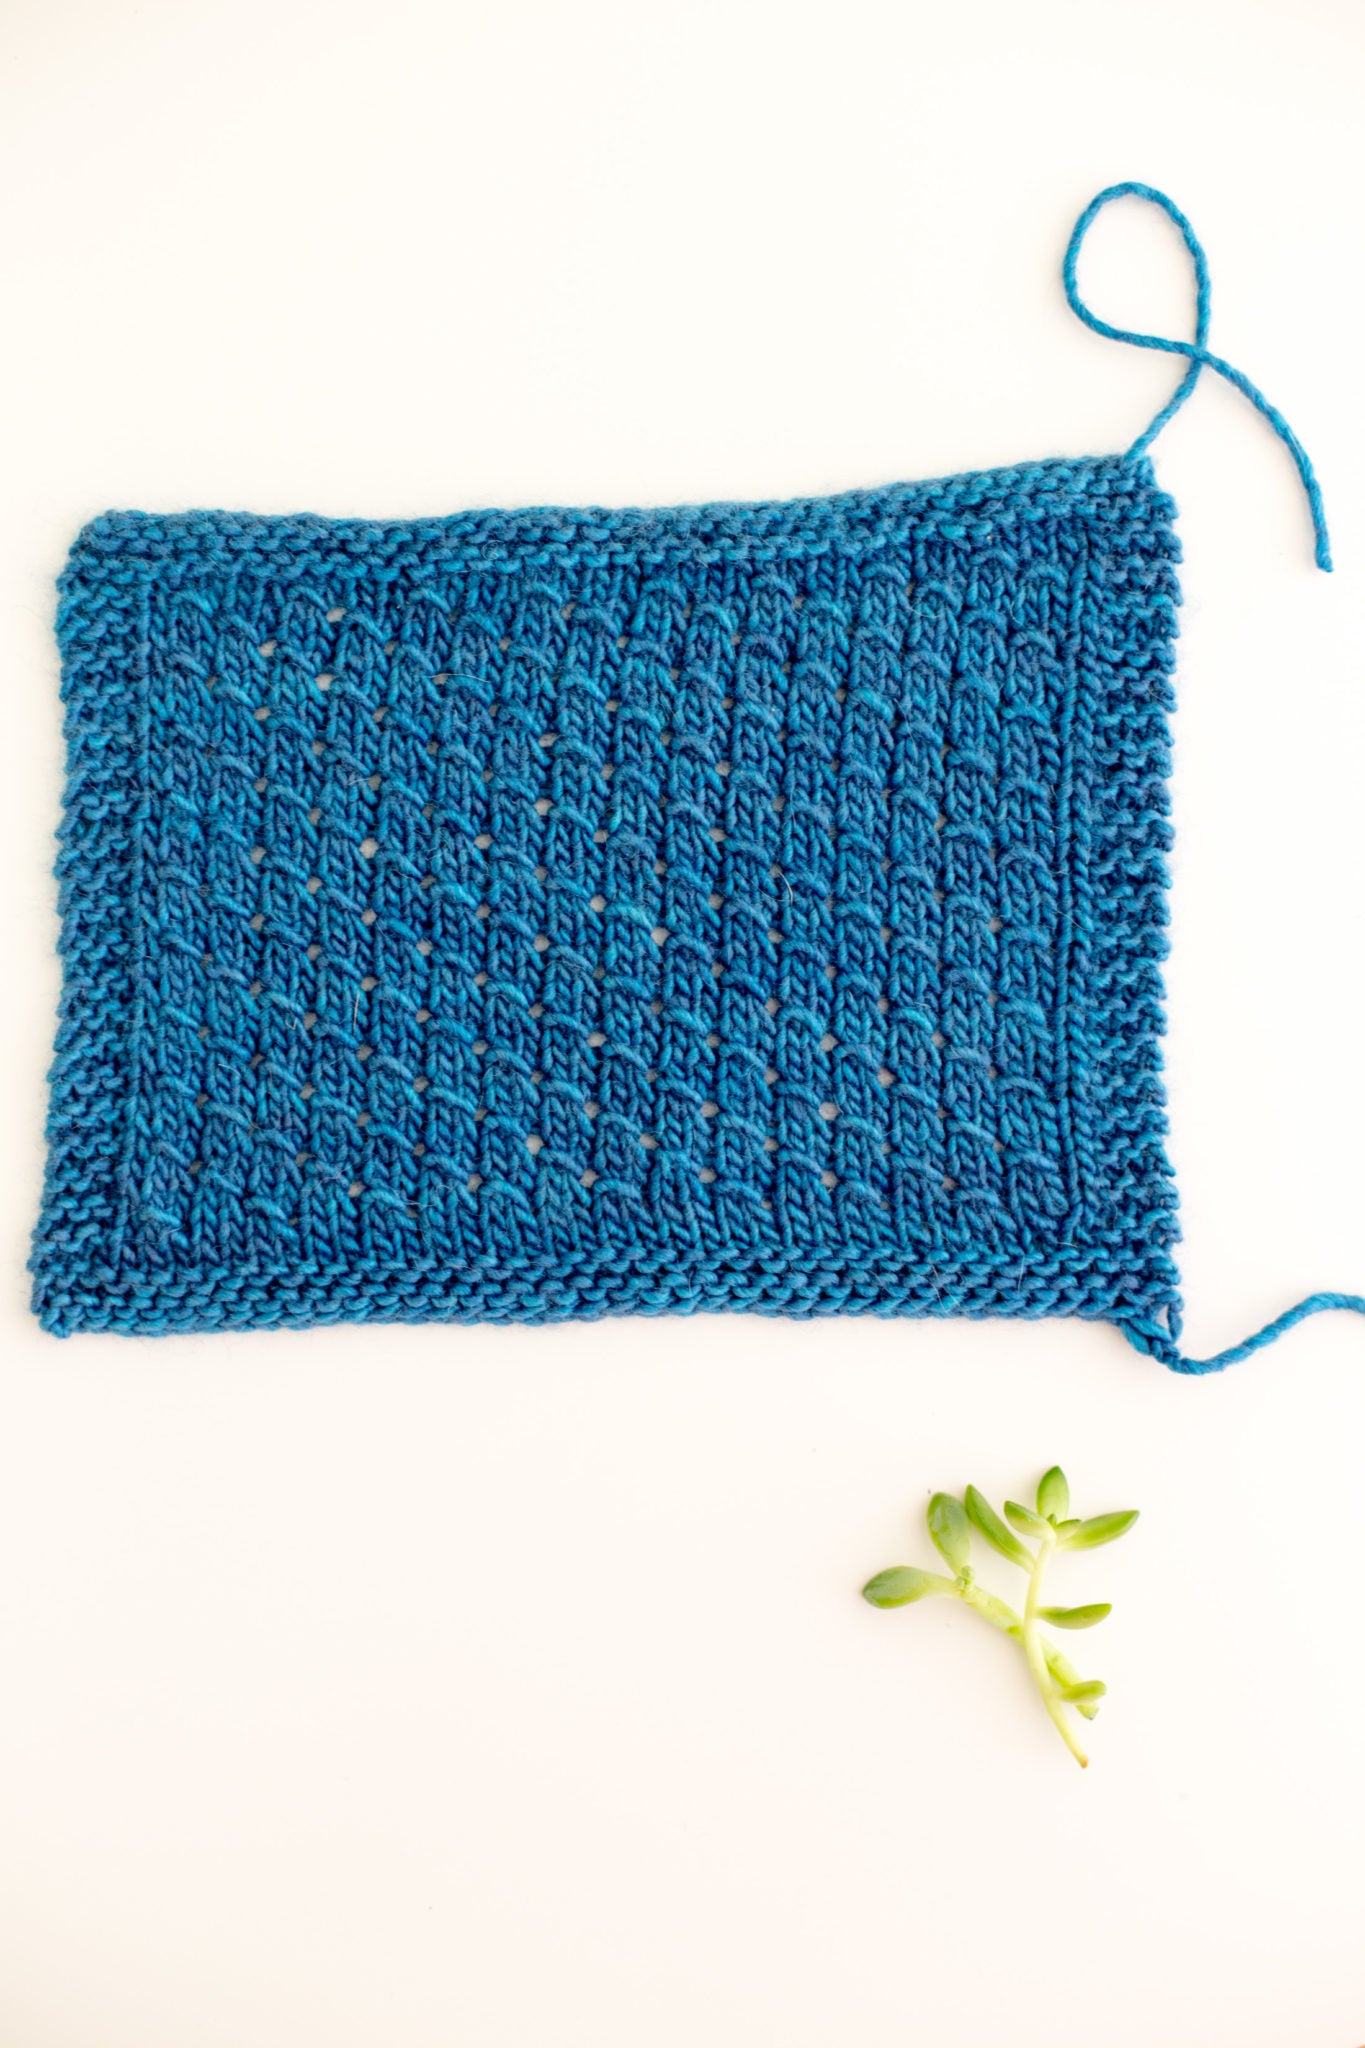 How to knit the Diagonal Scallop Stitch Pattern